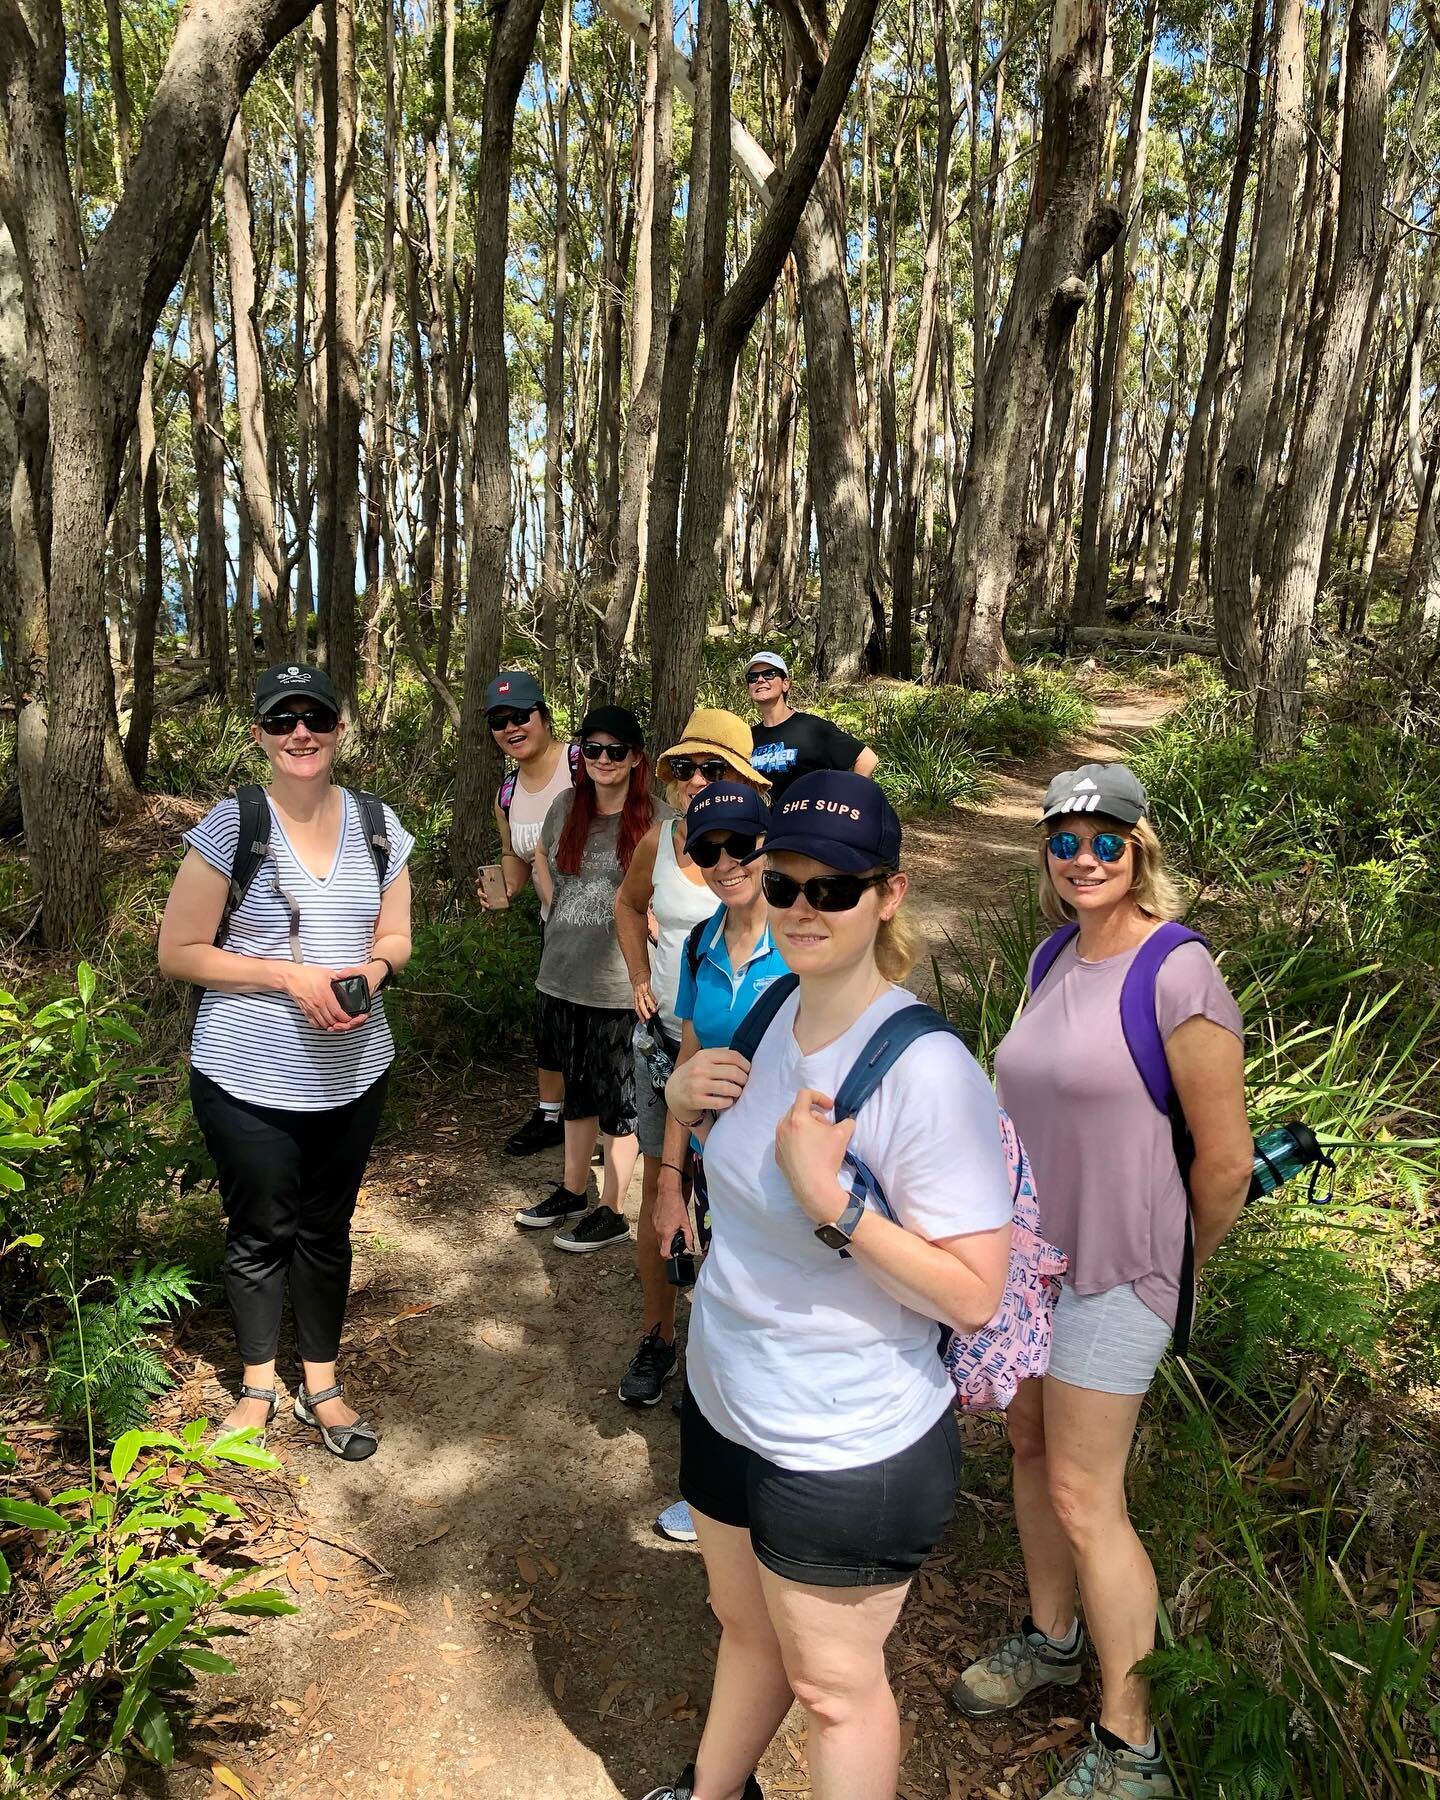 Thank you Mother Nature! 🌏
.
Our next She SUPs weekend away (which goes LIVE at 8am this Saturday morning!) is going to be pretty special ✨
.
Not only will we be paddling, bush walking and yoga-ing in the spectacular Ku-ring-Gai National Park in Syd